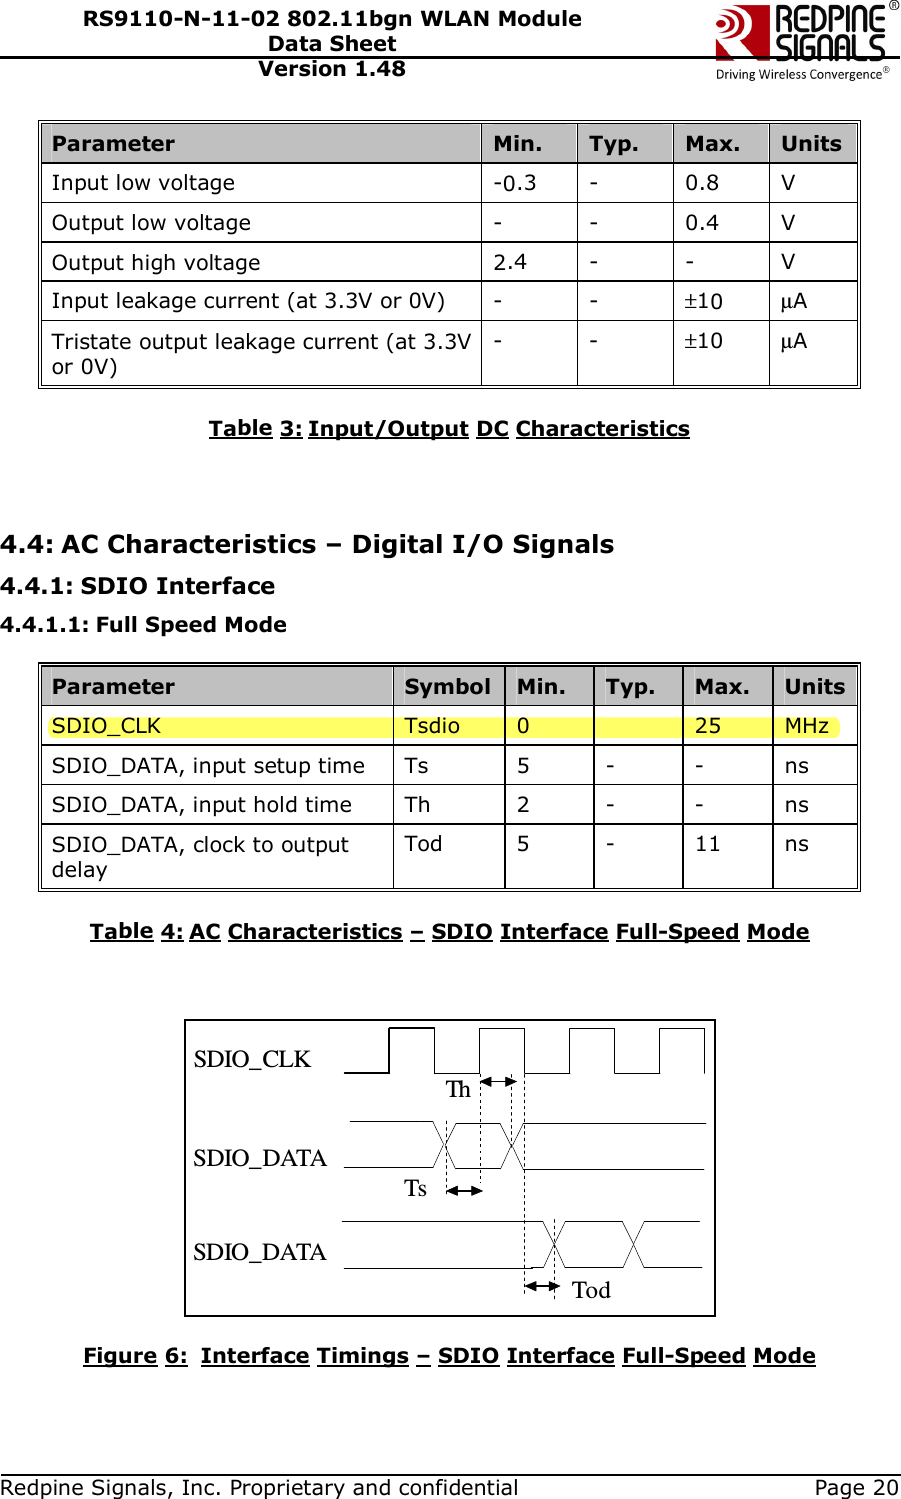   Redpine Signals, Inc. Proprietary and confidential  Page 20 RS9110-N-11-02 802.11bgn WLAN Module Data Sheet Version 1.48 Parameter  Min.  Typ.  Max.  Units Input low voltage  -0.3  -  0.8  V Output low voltage  - -  0.4  V Output high voltage  2.4  -  -  V Input leakage current (at 3.3V or 0V)  -  -  ±10 µA Tristate output leakage current (at 3.3V or 0V) -  -  ±10  µA  Table 3: Input/Output DC Characteristics    4.4: AC Characteristics – Digital I/O Signals 4.4.1: SDIO Interface 4.4.1.1: Full Speed Mode  Parameter  Symbol Min.  Typ.  Max.  Units SDIO_CLK   Tsdio  0    25  MHz SDIO_DATA, input setup time   Ts  5  -  -  ns SDIO_DATA, input hold time  Th  2  -  -  ns SDIO_DATA, clock to output delay Tod  5  -  11  ns     Table 4: AC Characteristics – SDIO Interface Full-Speed Mode    SDIO_DATATodSDIO_DATASDIO_CLKThTs  Figure 6:  Interface Timings – SDIO Interface Full-Speed Mode   